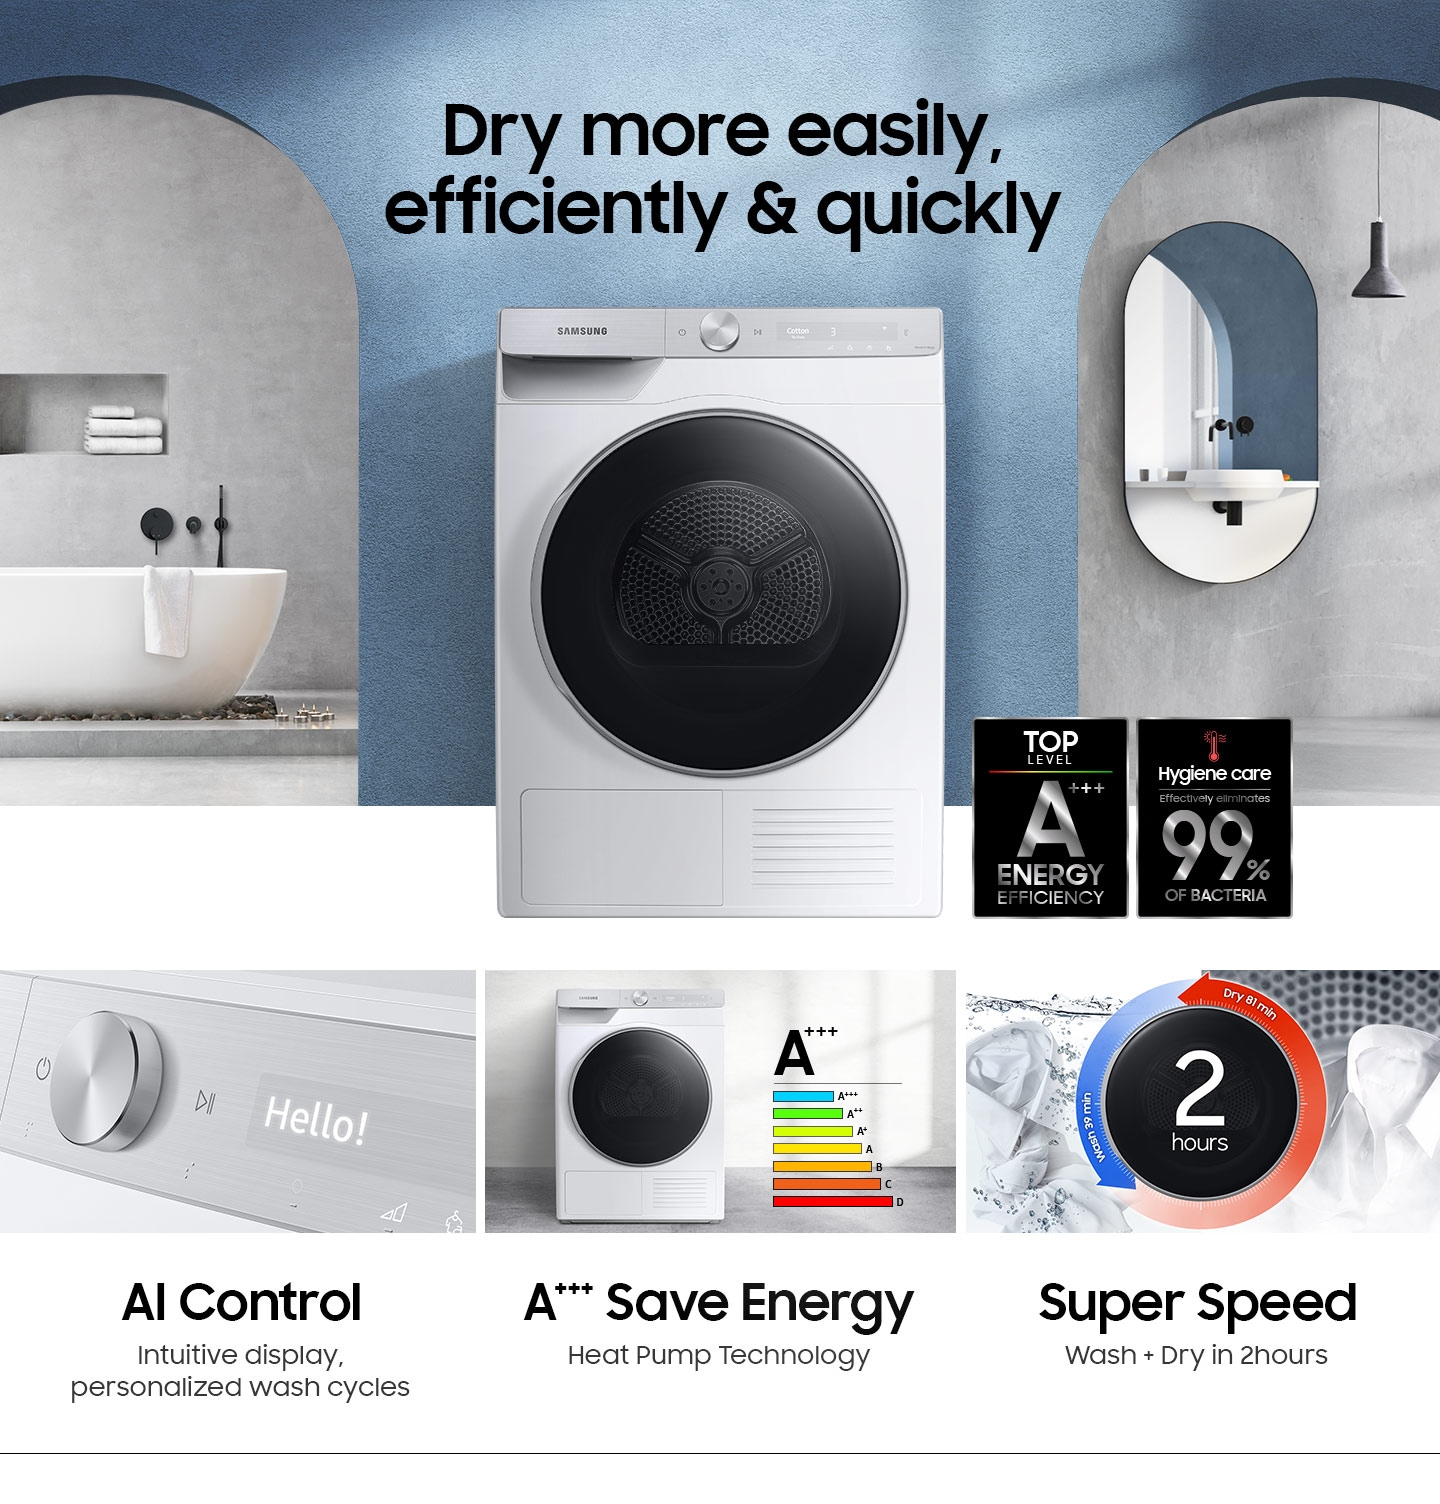 DV8000T is energy-efficient and 99&#37" germ-free with AI Control, A+++ Save Energy, and Super Speed functions.